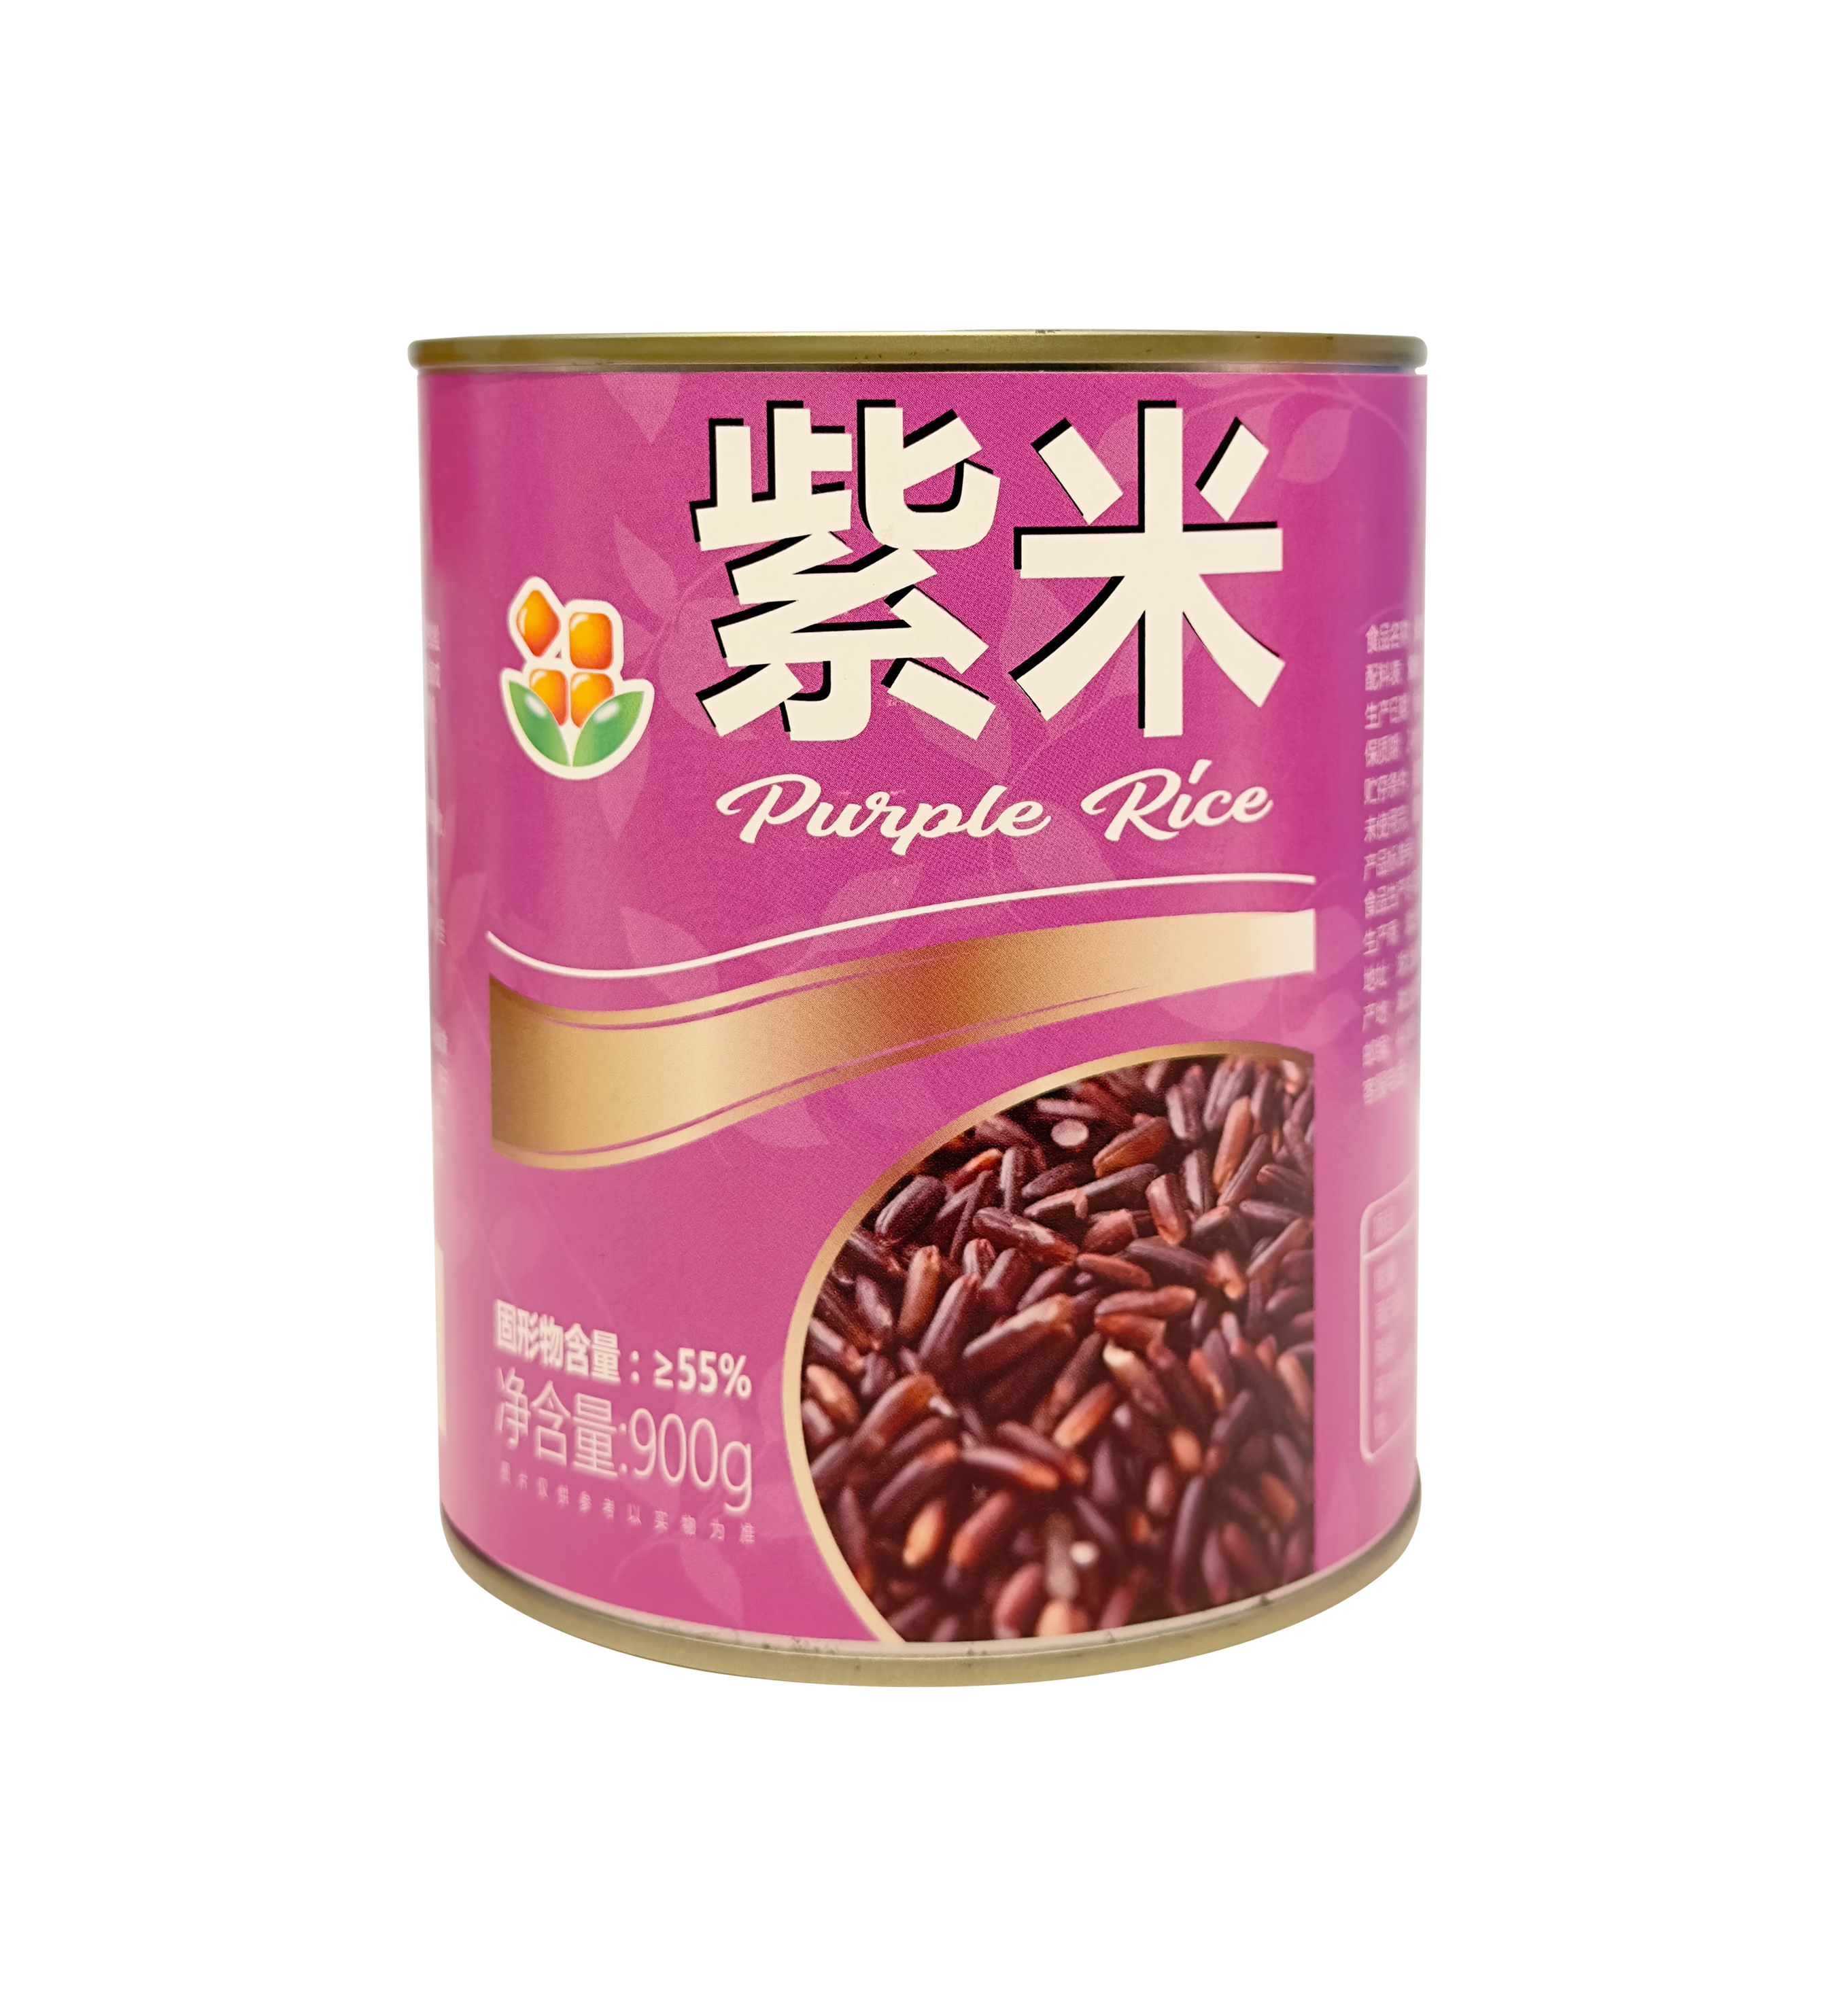 Canned purple rice